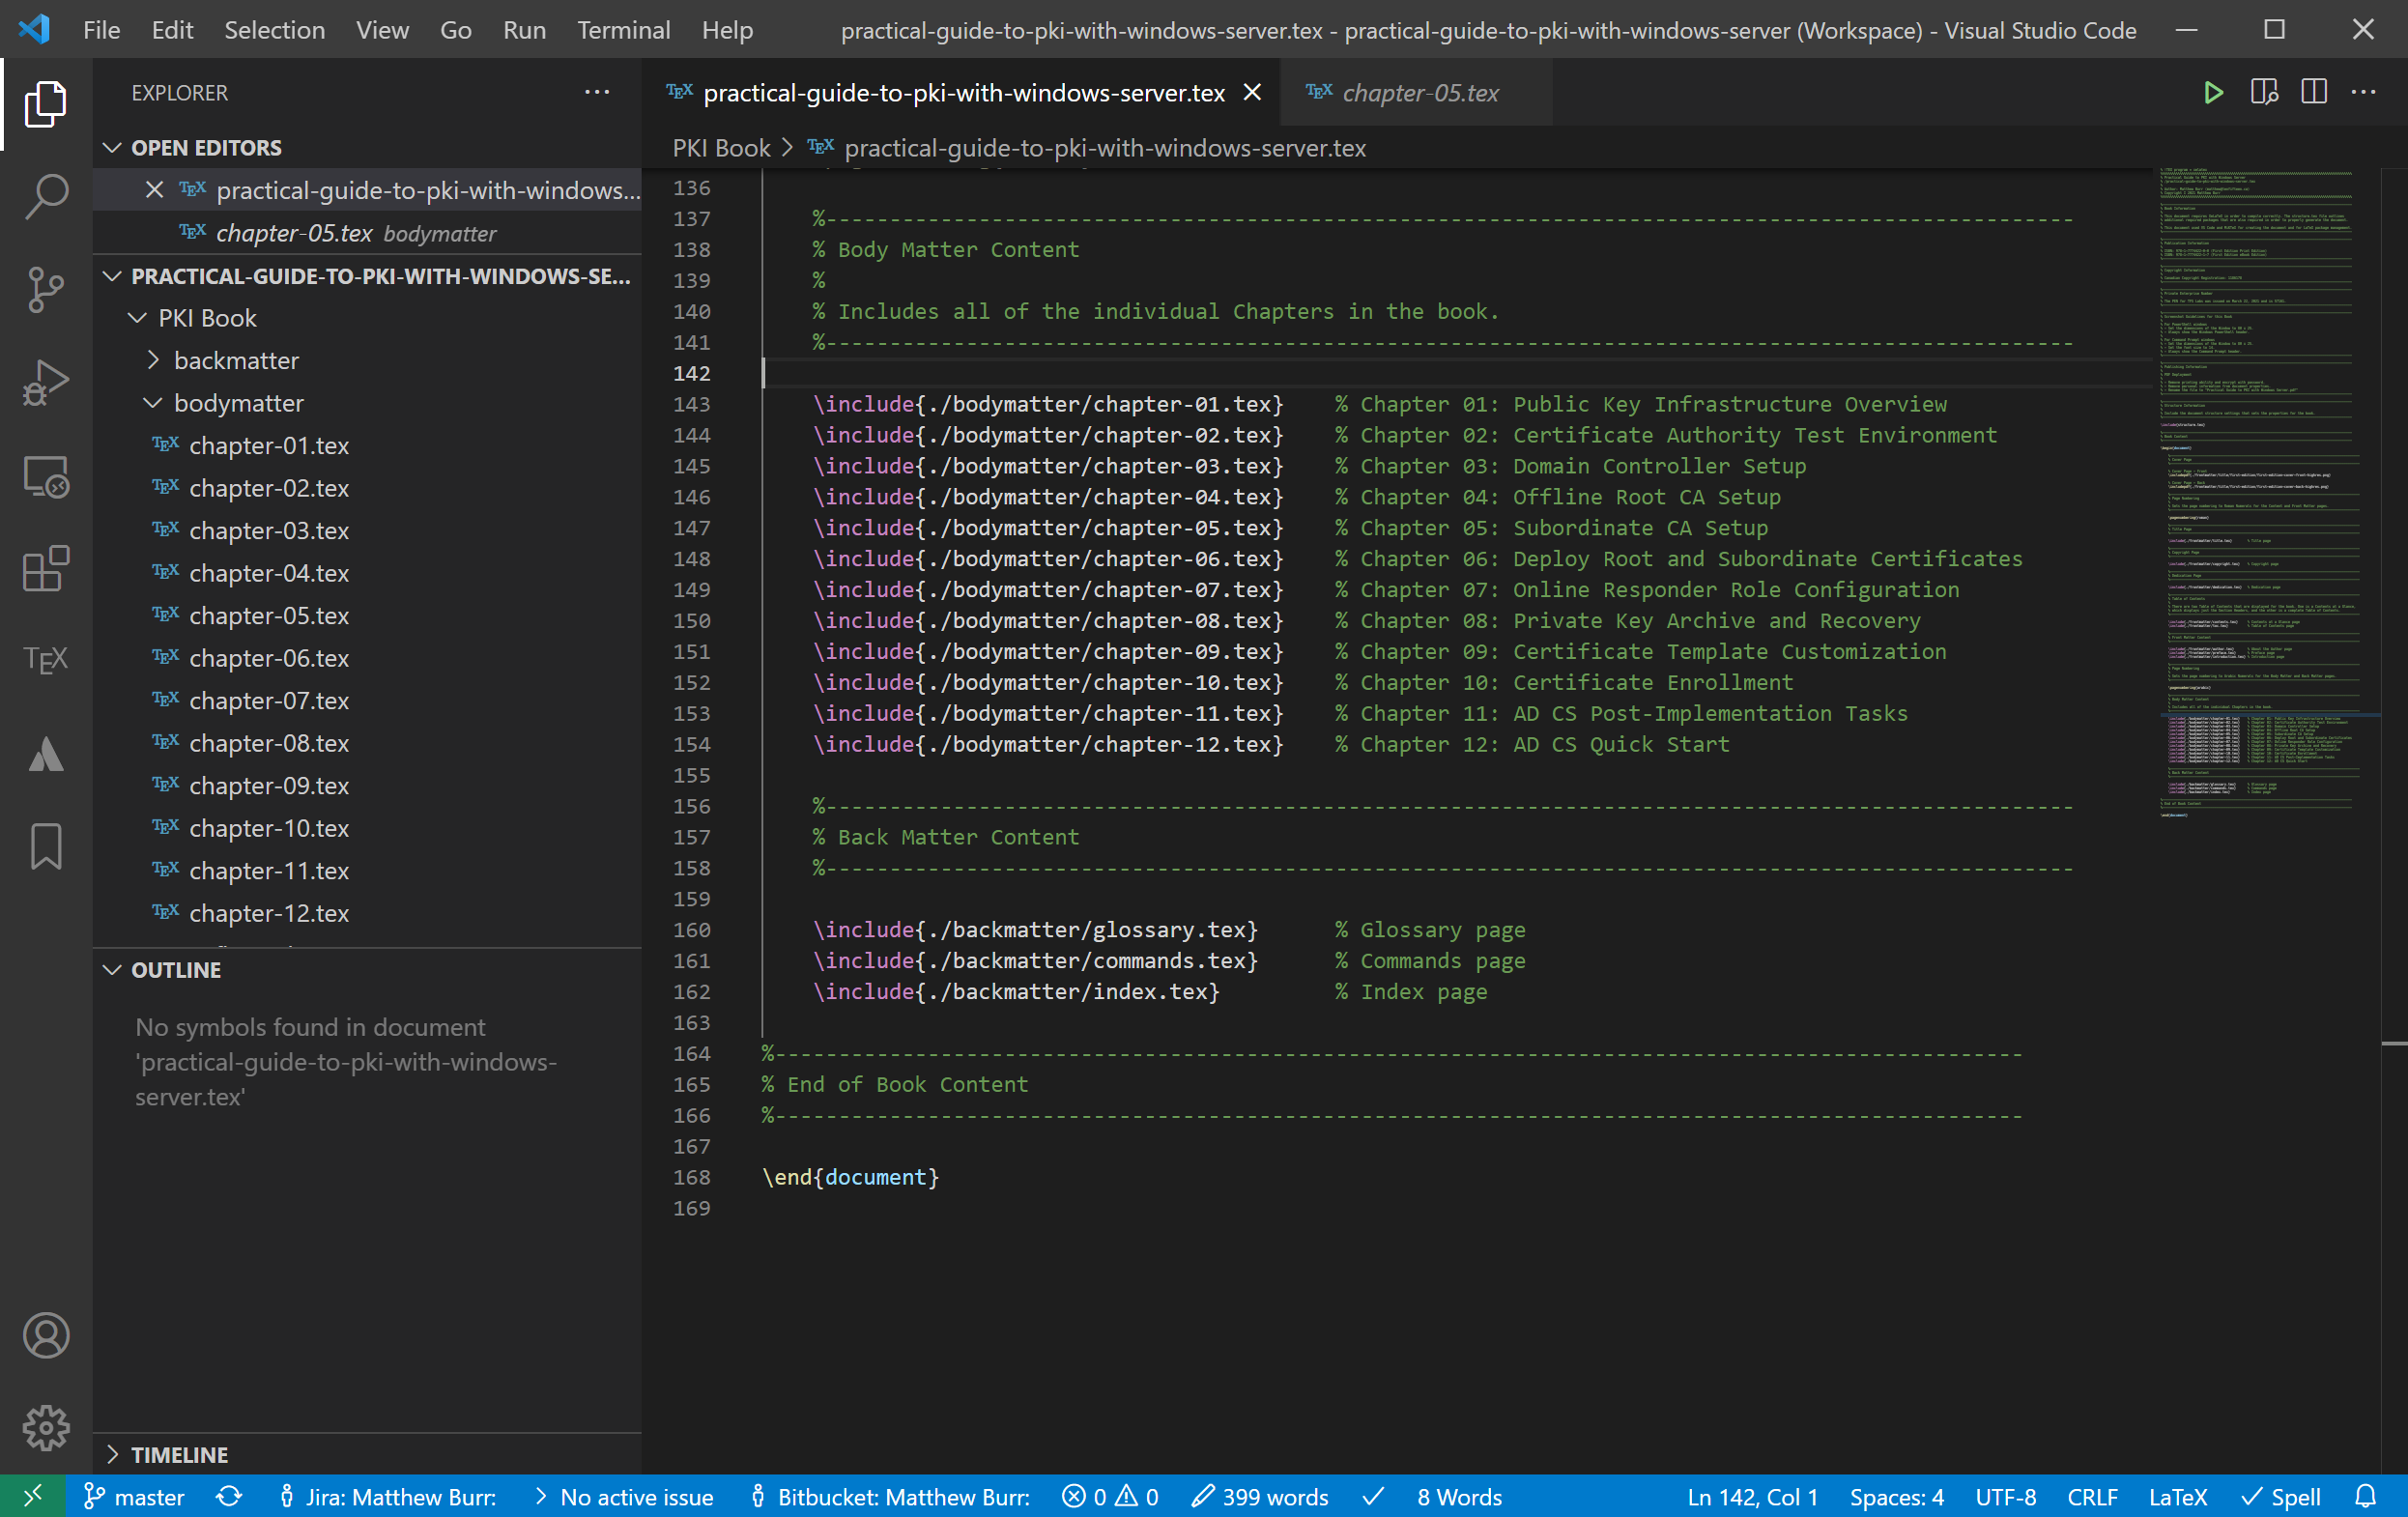 VS Code with all LaTeX and Atlassian extensions.